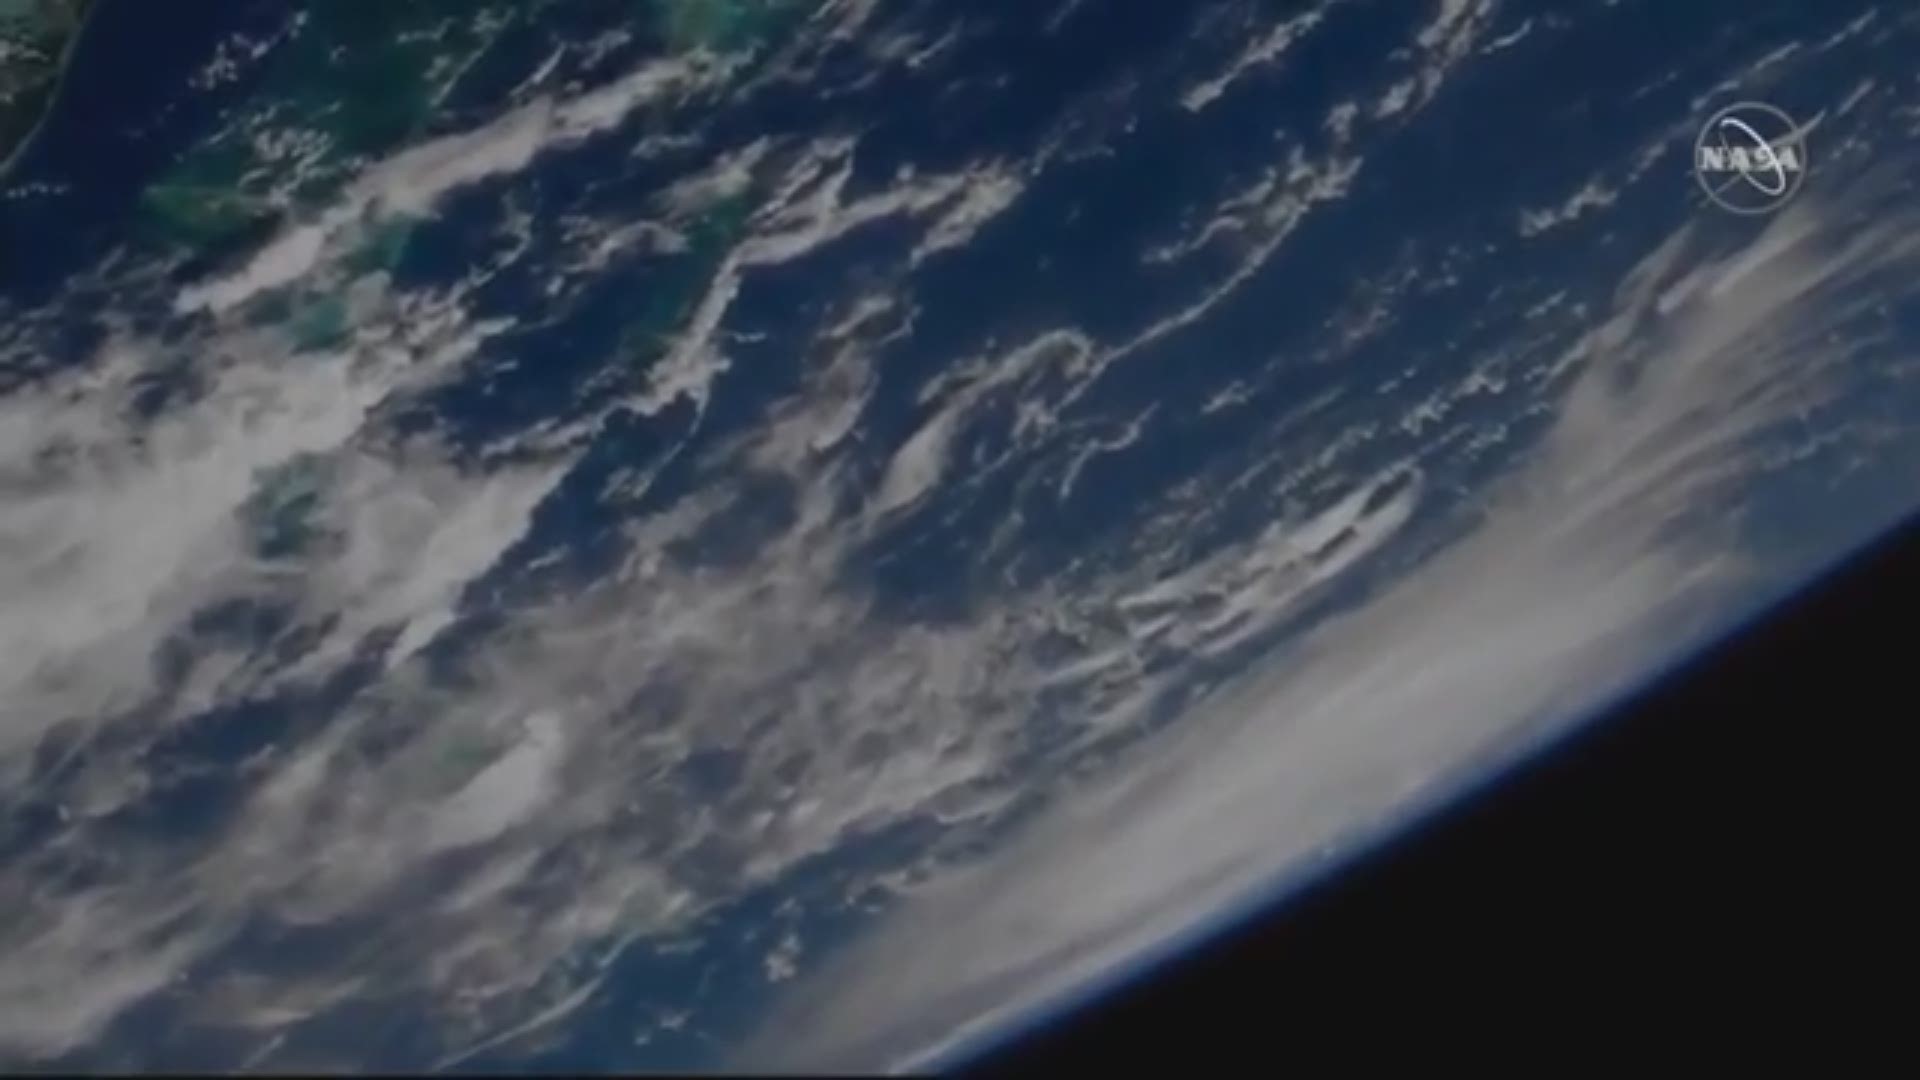 NASA released this video Thursday taken from the International Space Station of what Hurricane Dorian looks like from space.